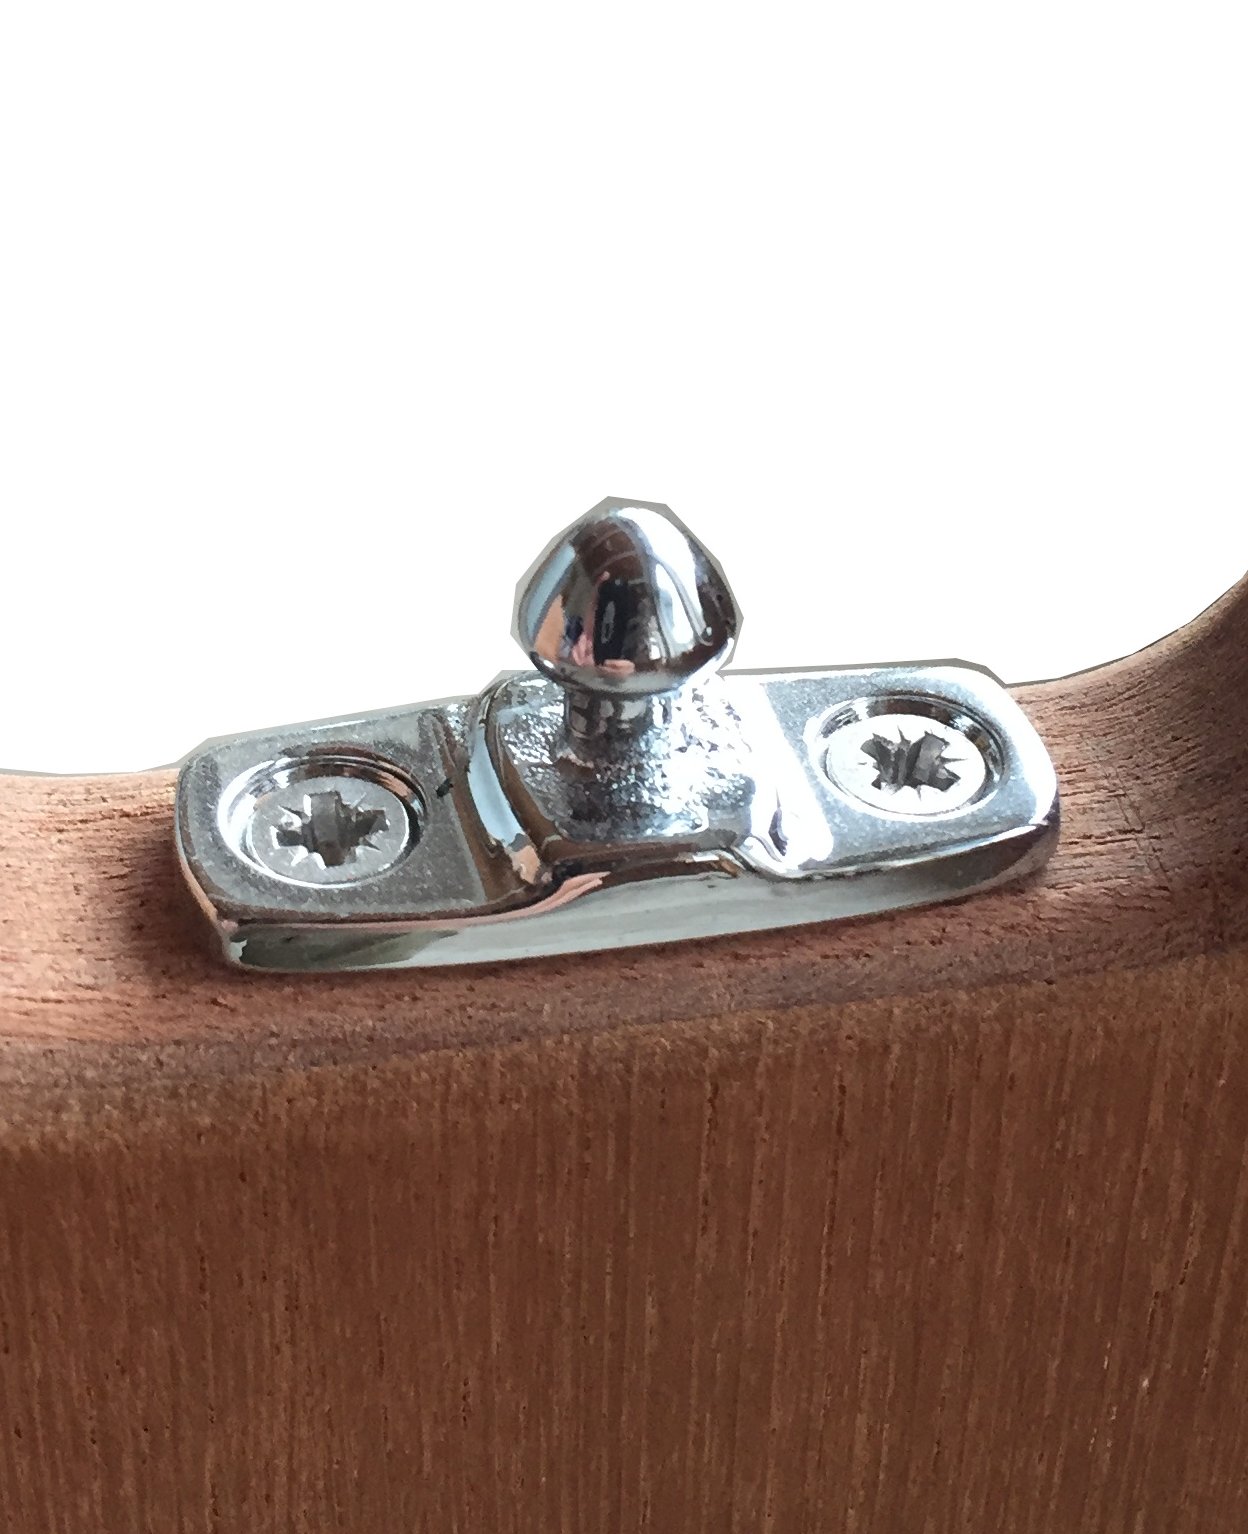 Detail view: Table clamp without table